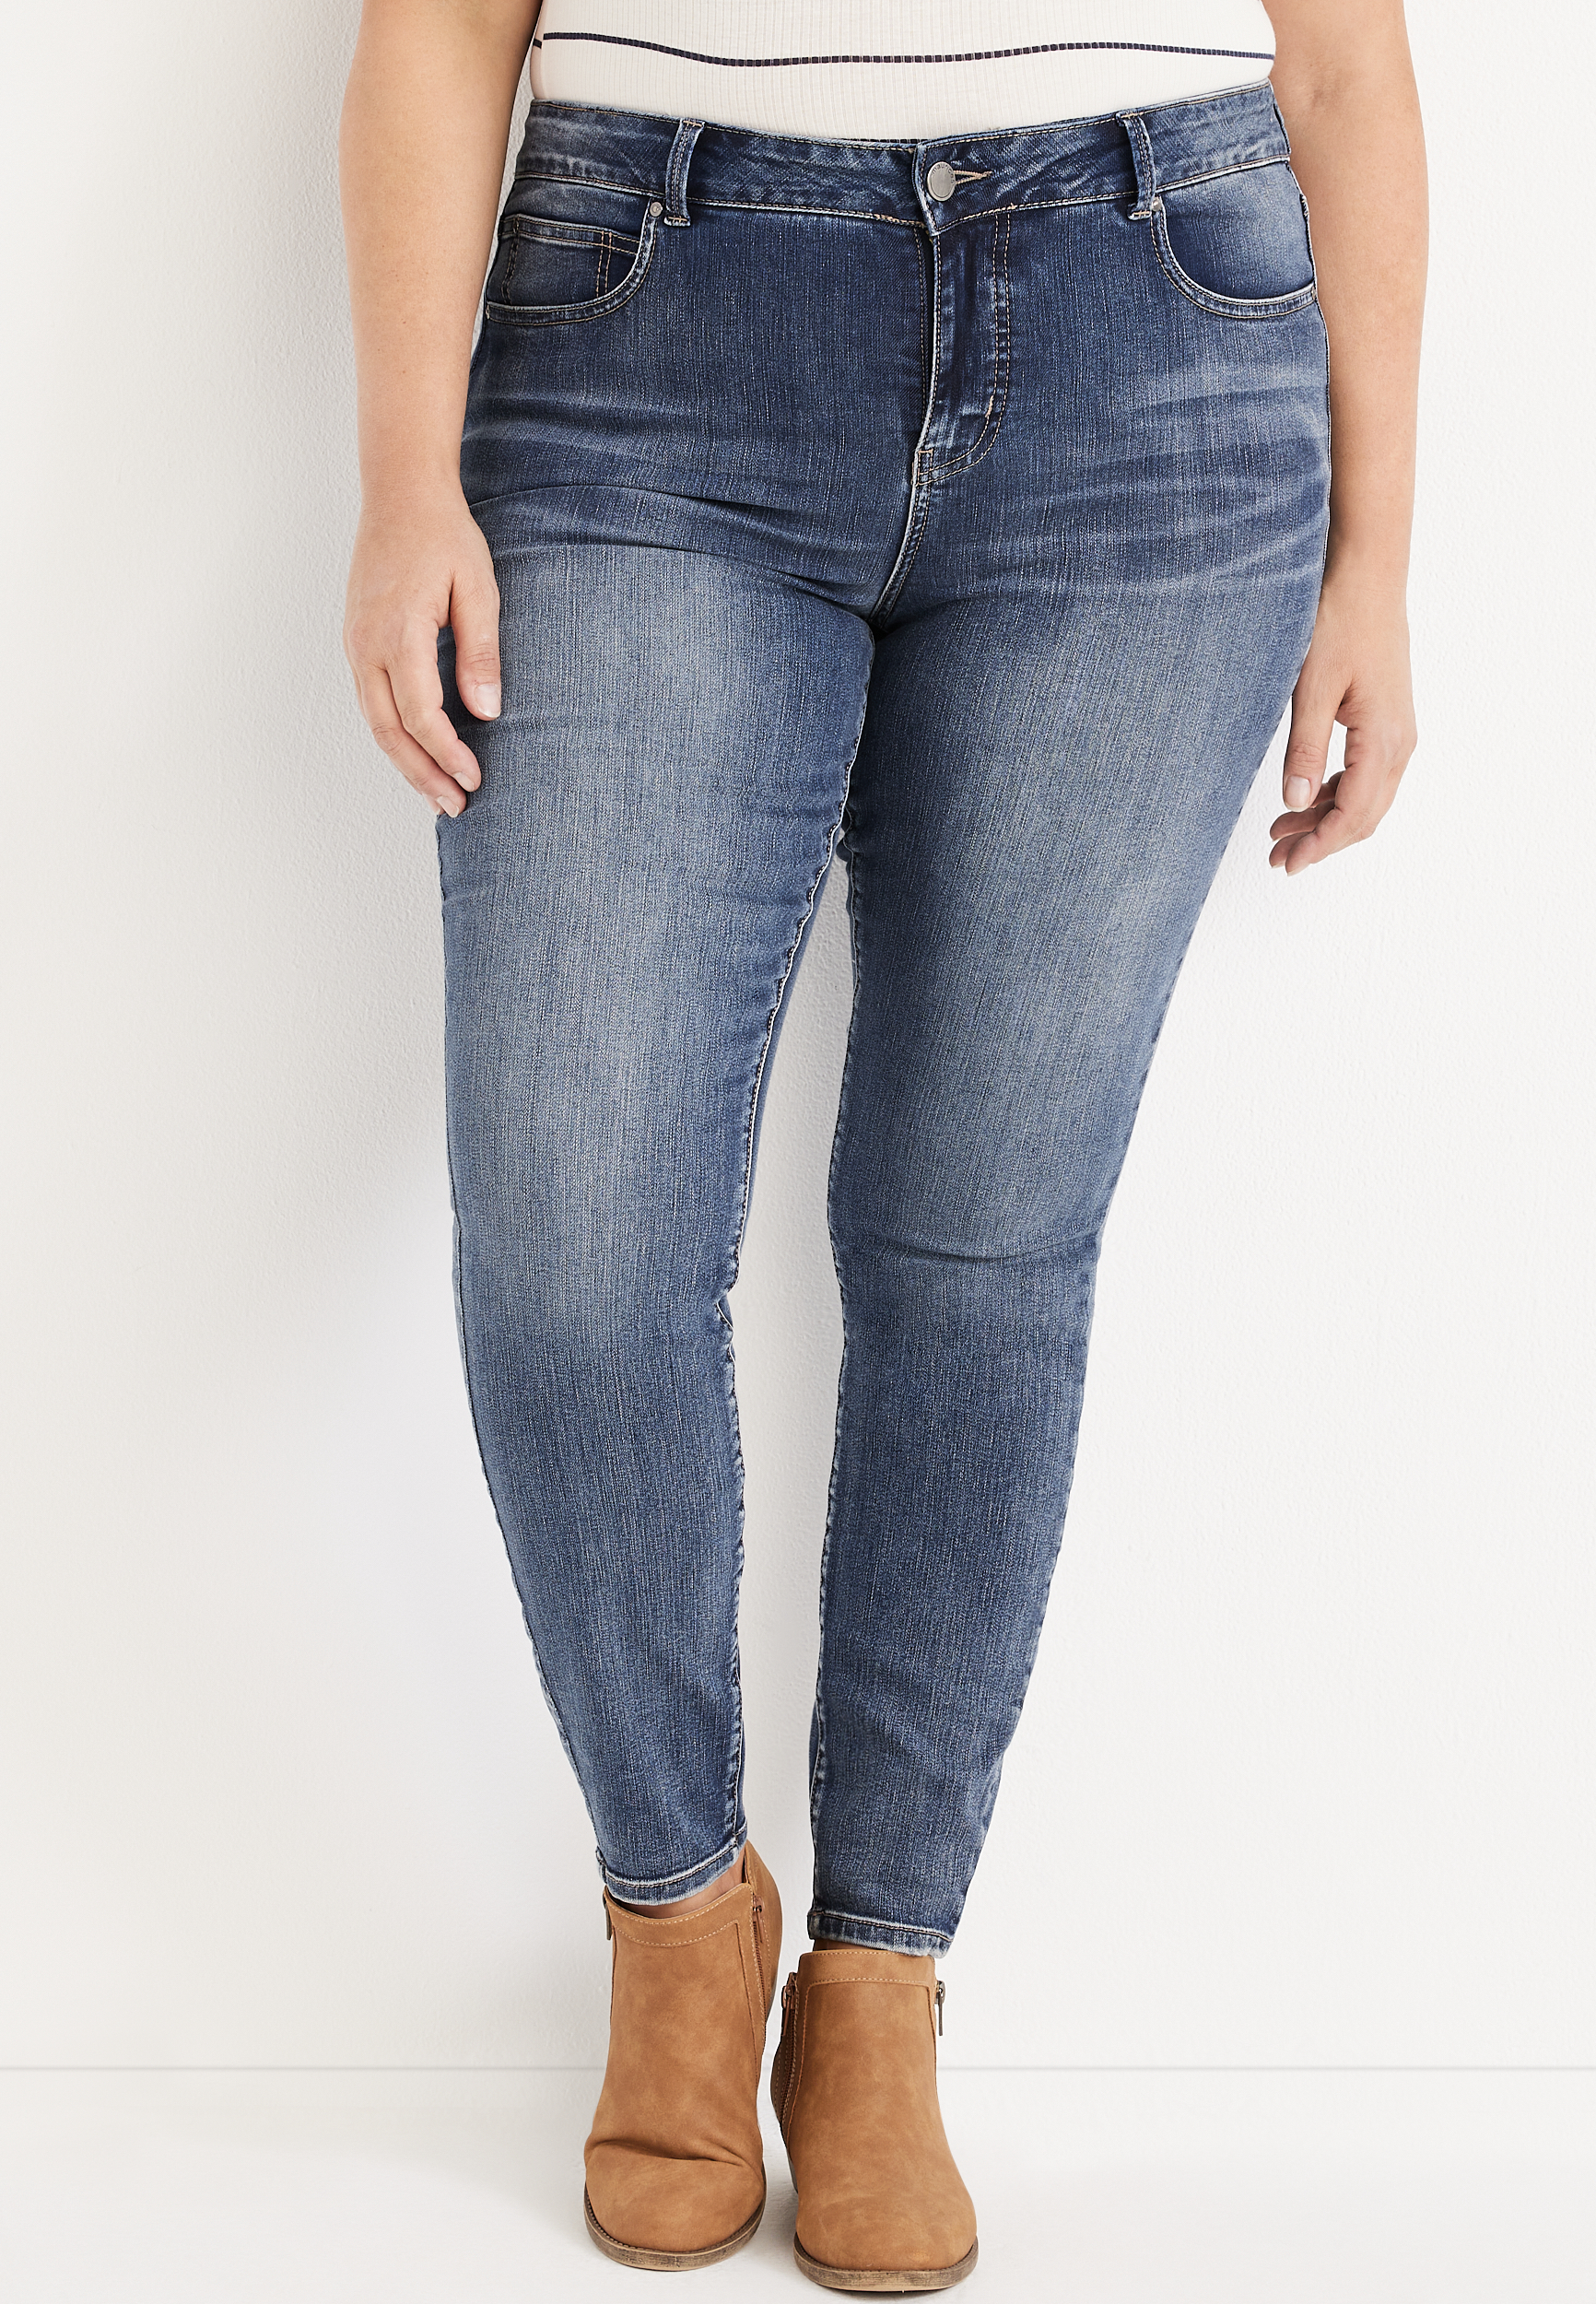 Plus Size m jeans by maurices™ Everflex™ Super Skinny High Rise Stretch Jean |